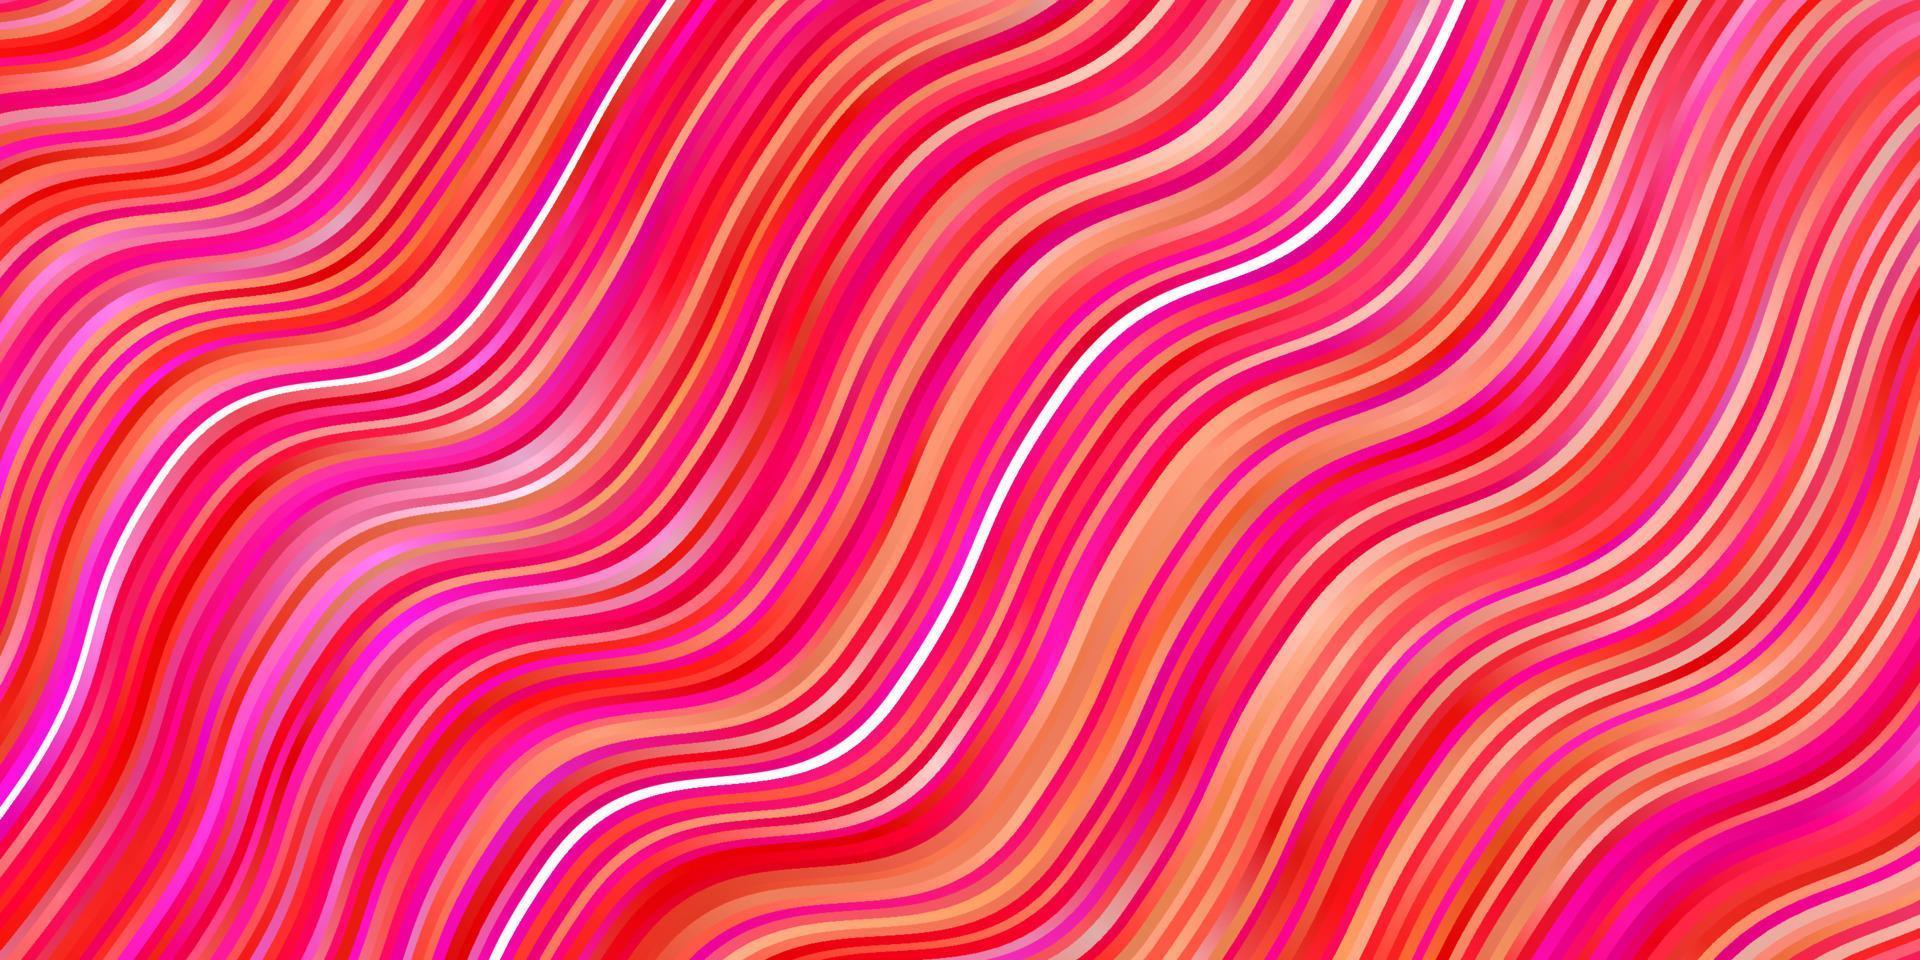 Light Pink vector pattern with lines.